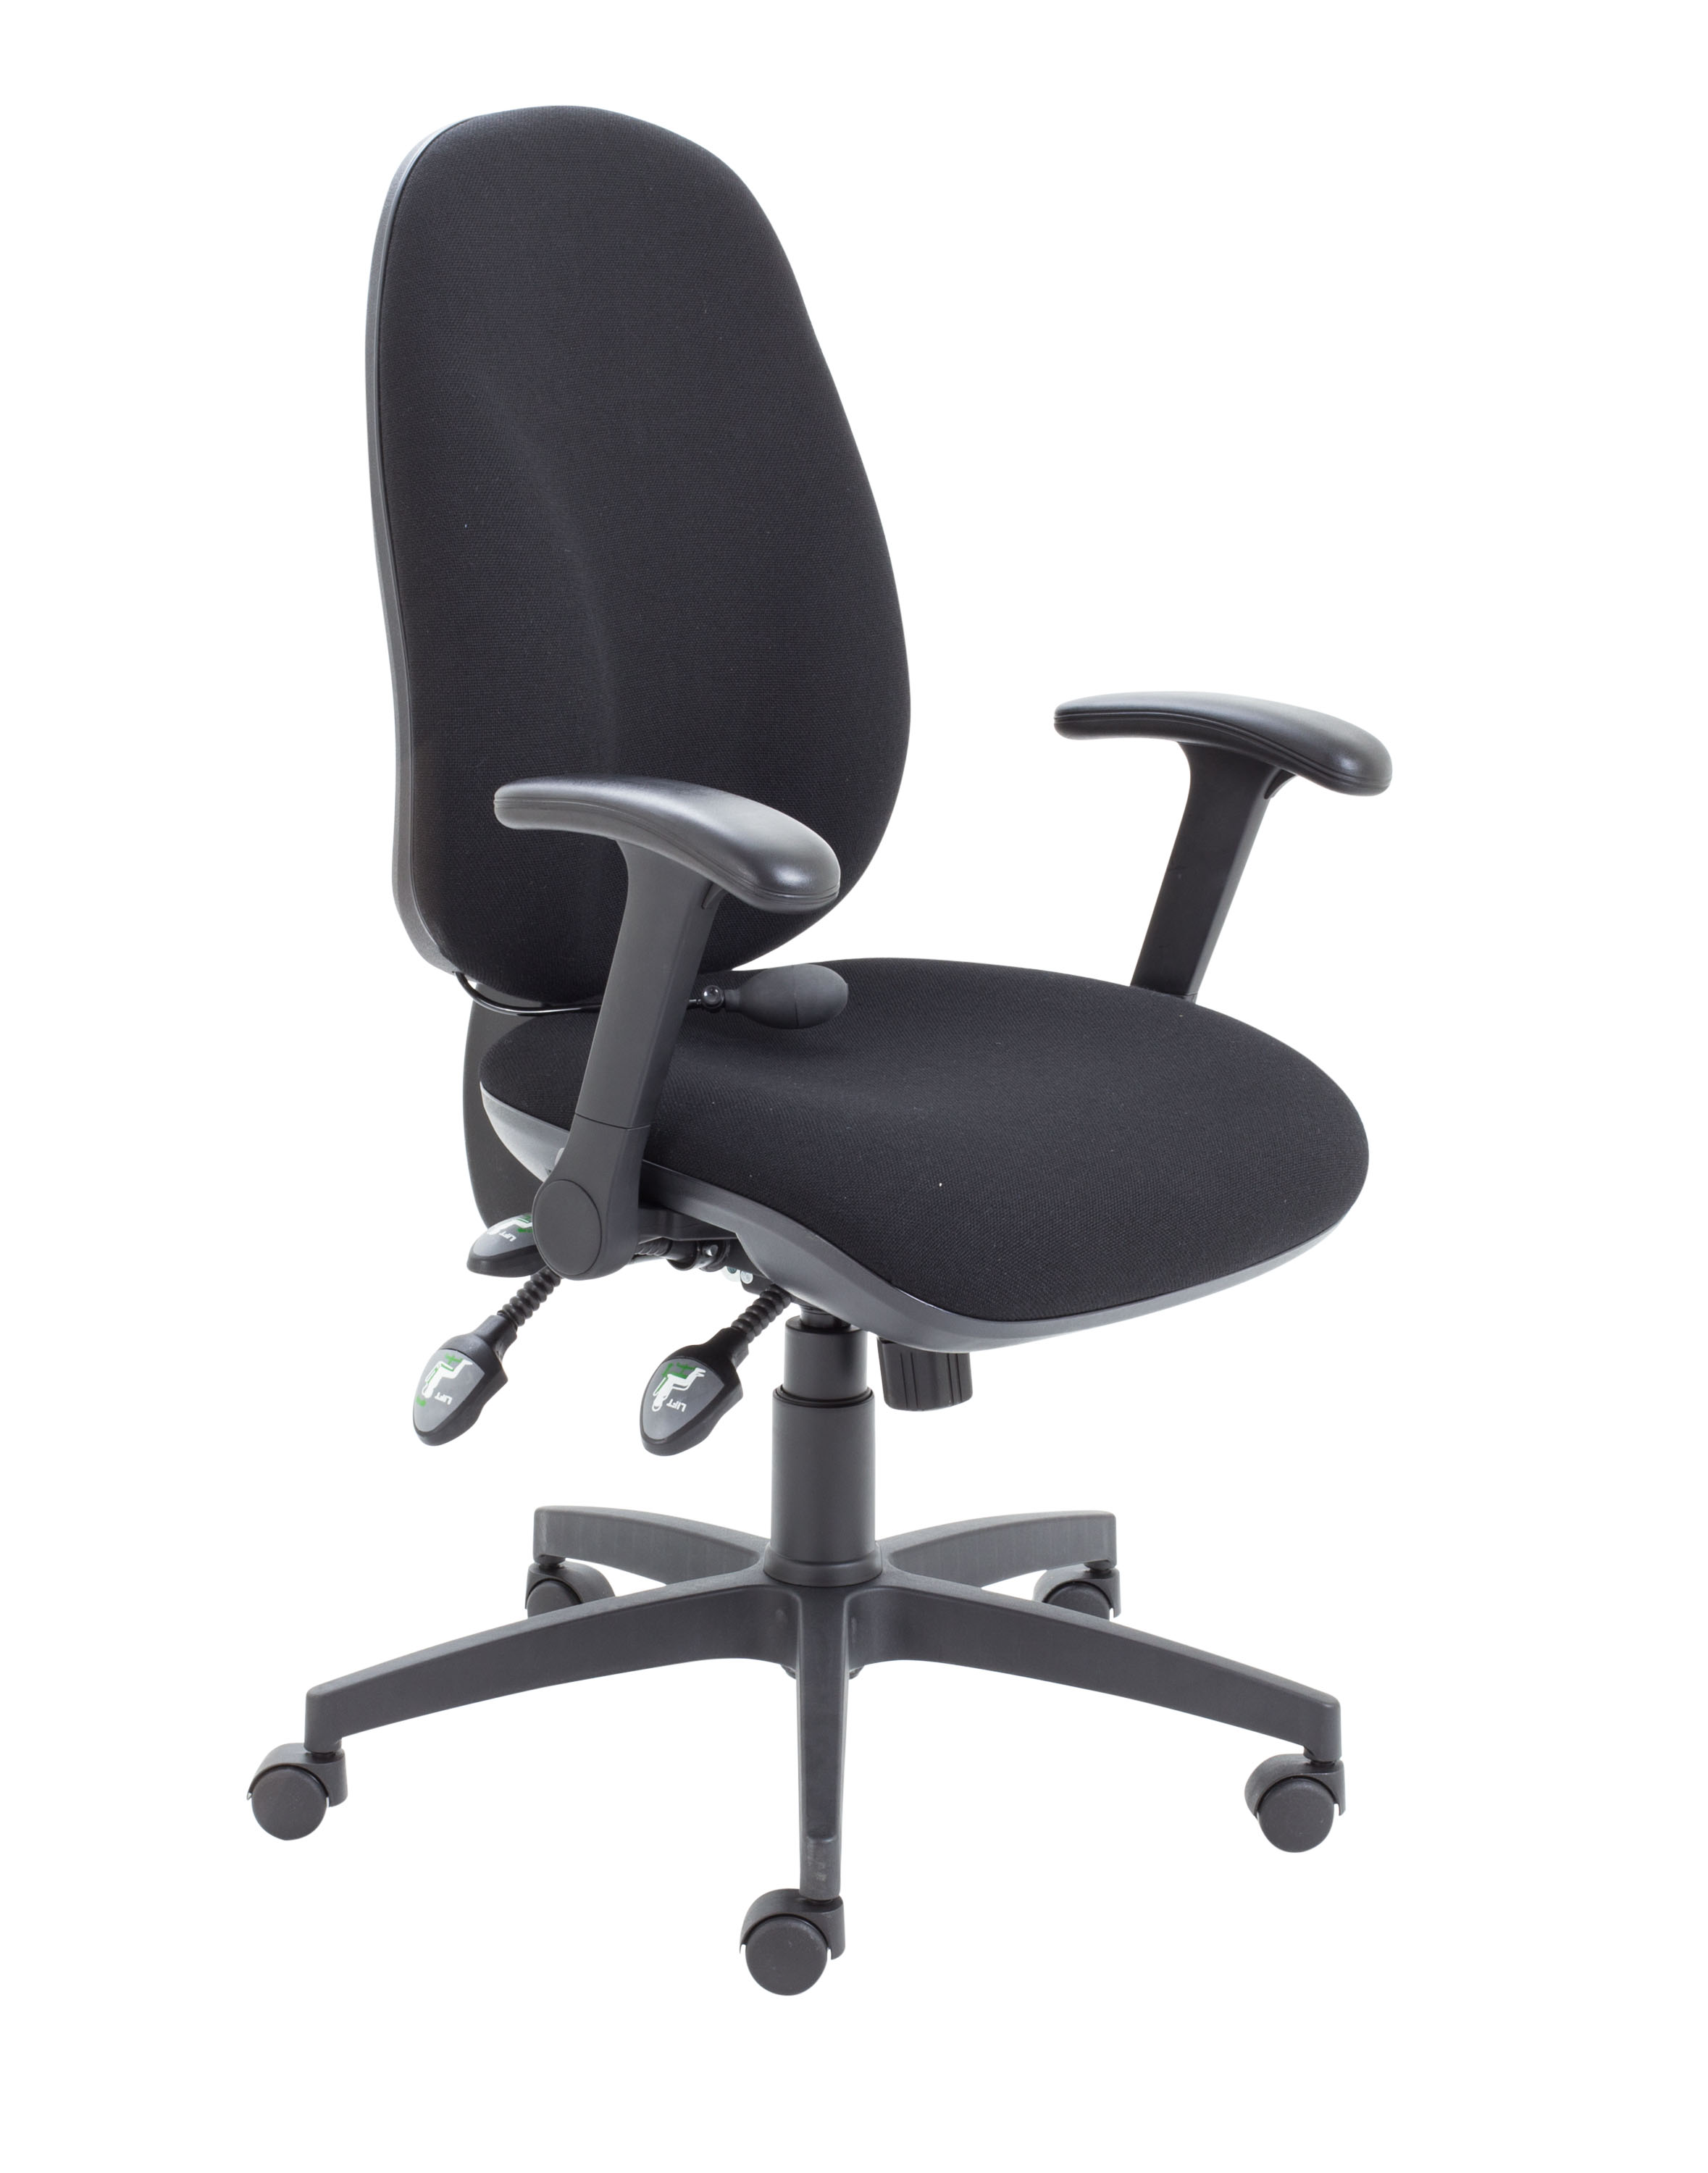 Maxi Ergo Chair With Folding Arms - Black